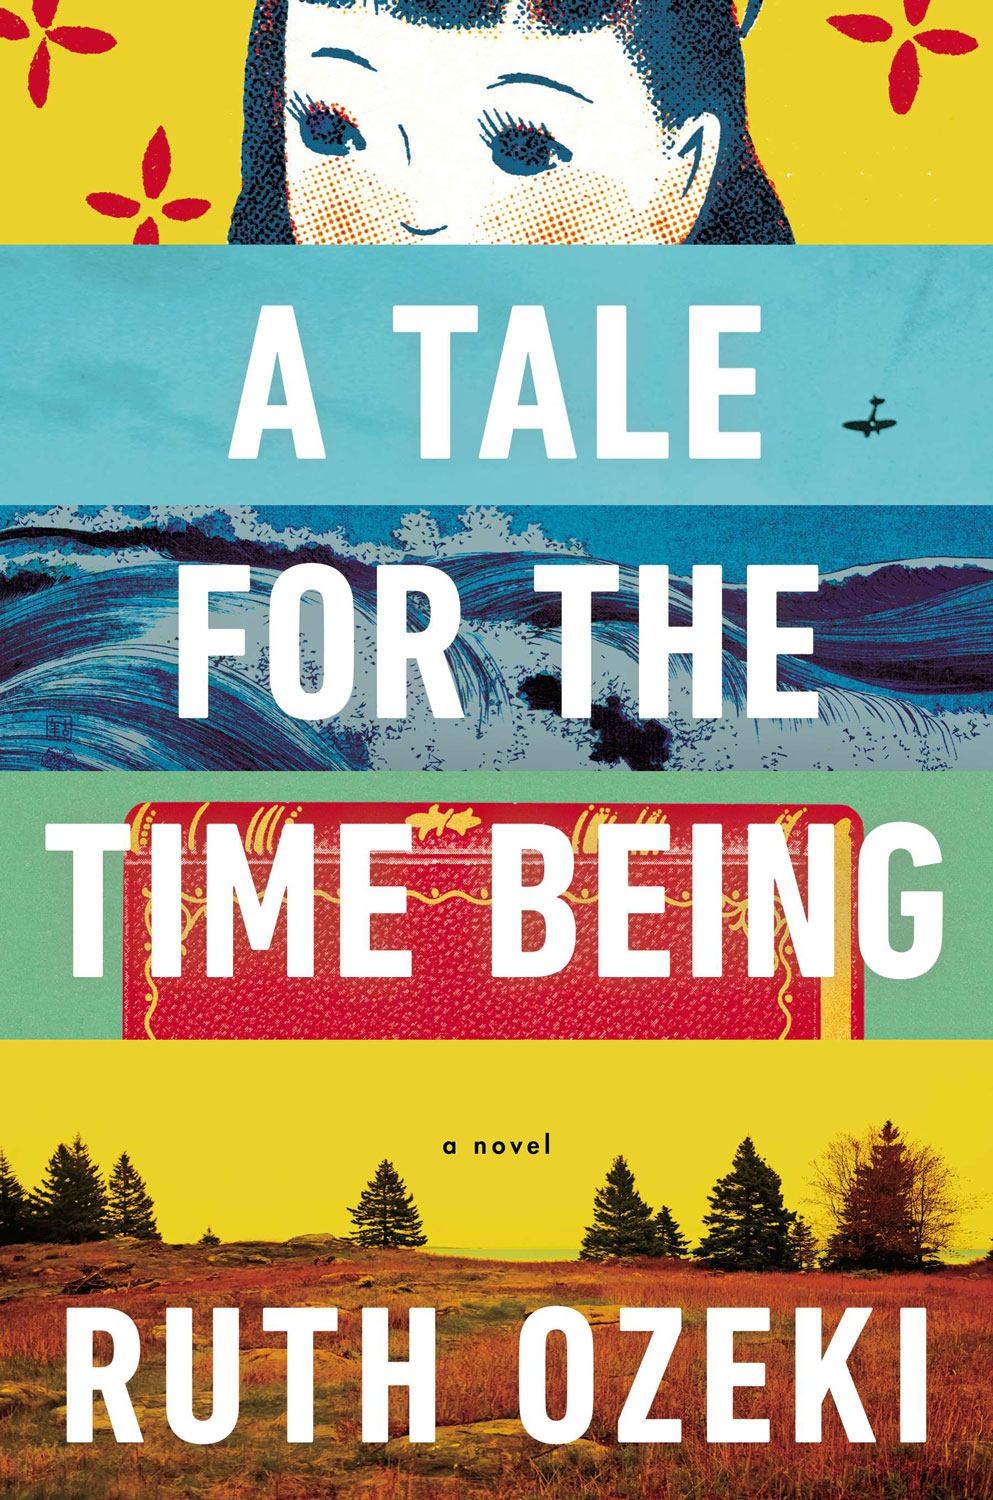 Ruth Ozeki, A Tale for the Time Being (2013)